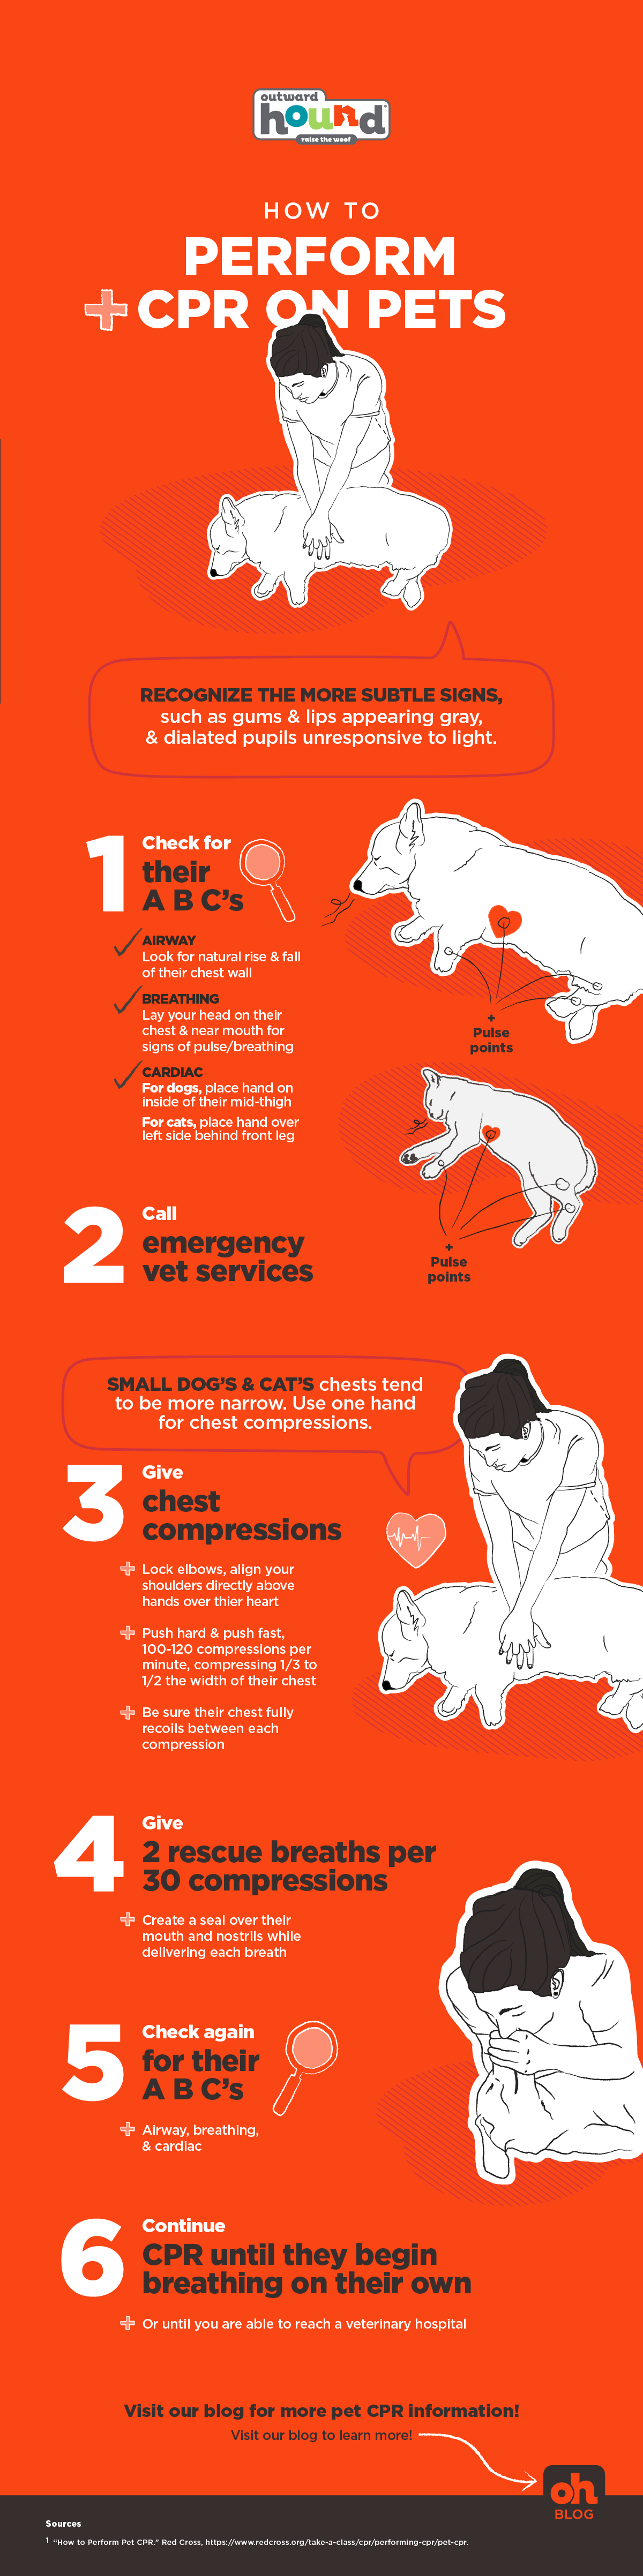 02.2022_Pet-CPR_Infographic-2.png